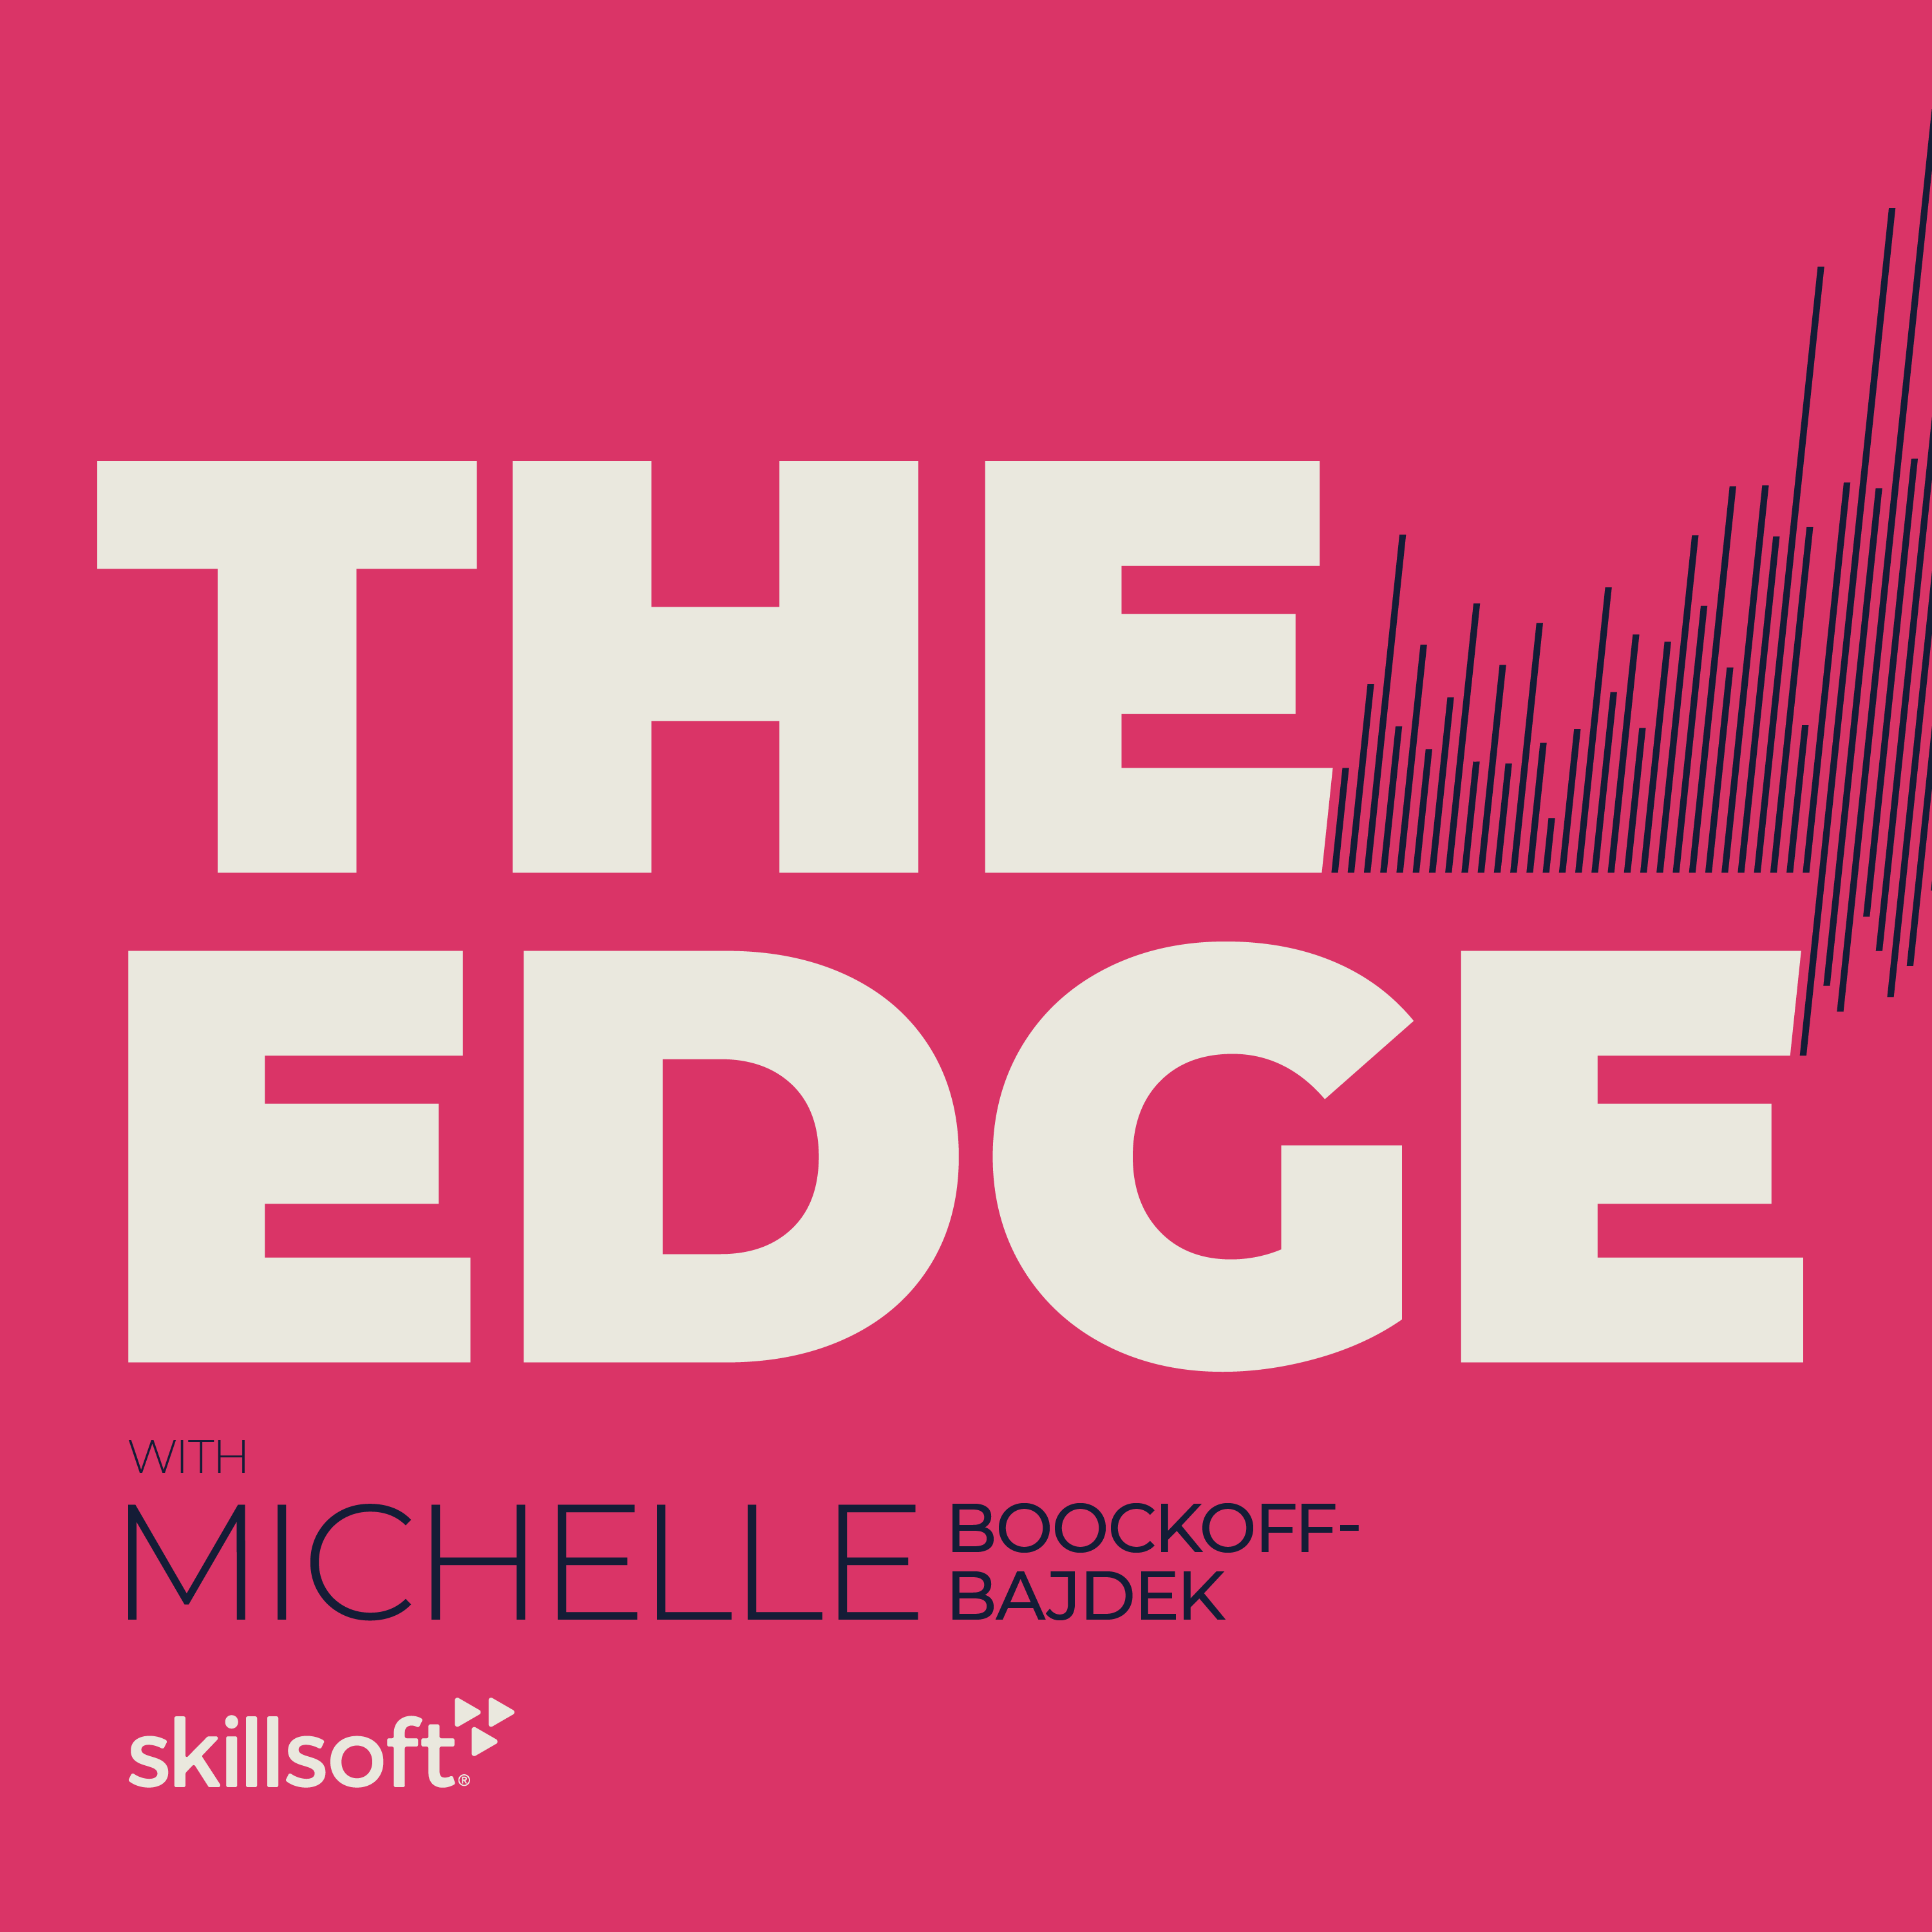 The Edge: “Safety First” – The New Motto for All 